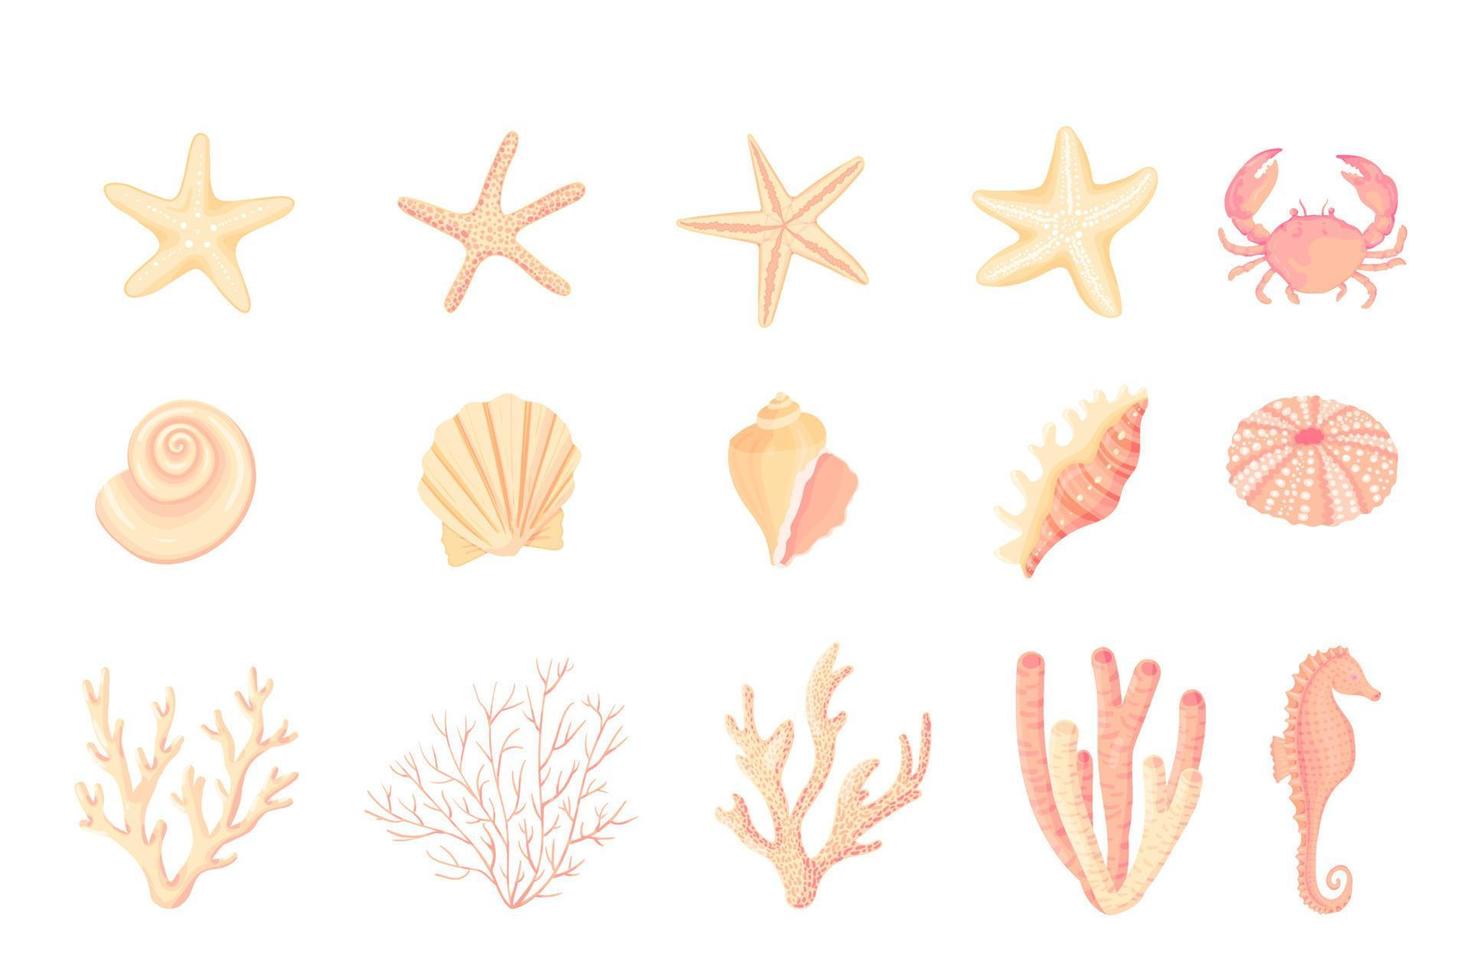 Seashells vector set. Collection of flat, cartoon sketches of molluscs sea shells, starfish, sea urchin, seahorse, hippocampus, crab, coral. Trendy coral reef under water collection isolated on white